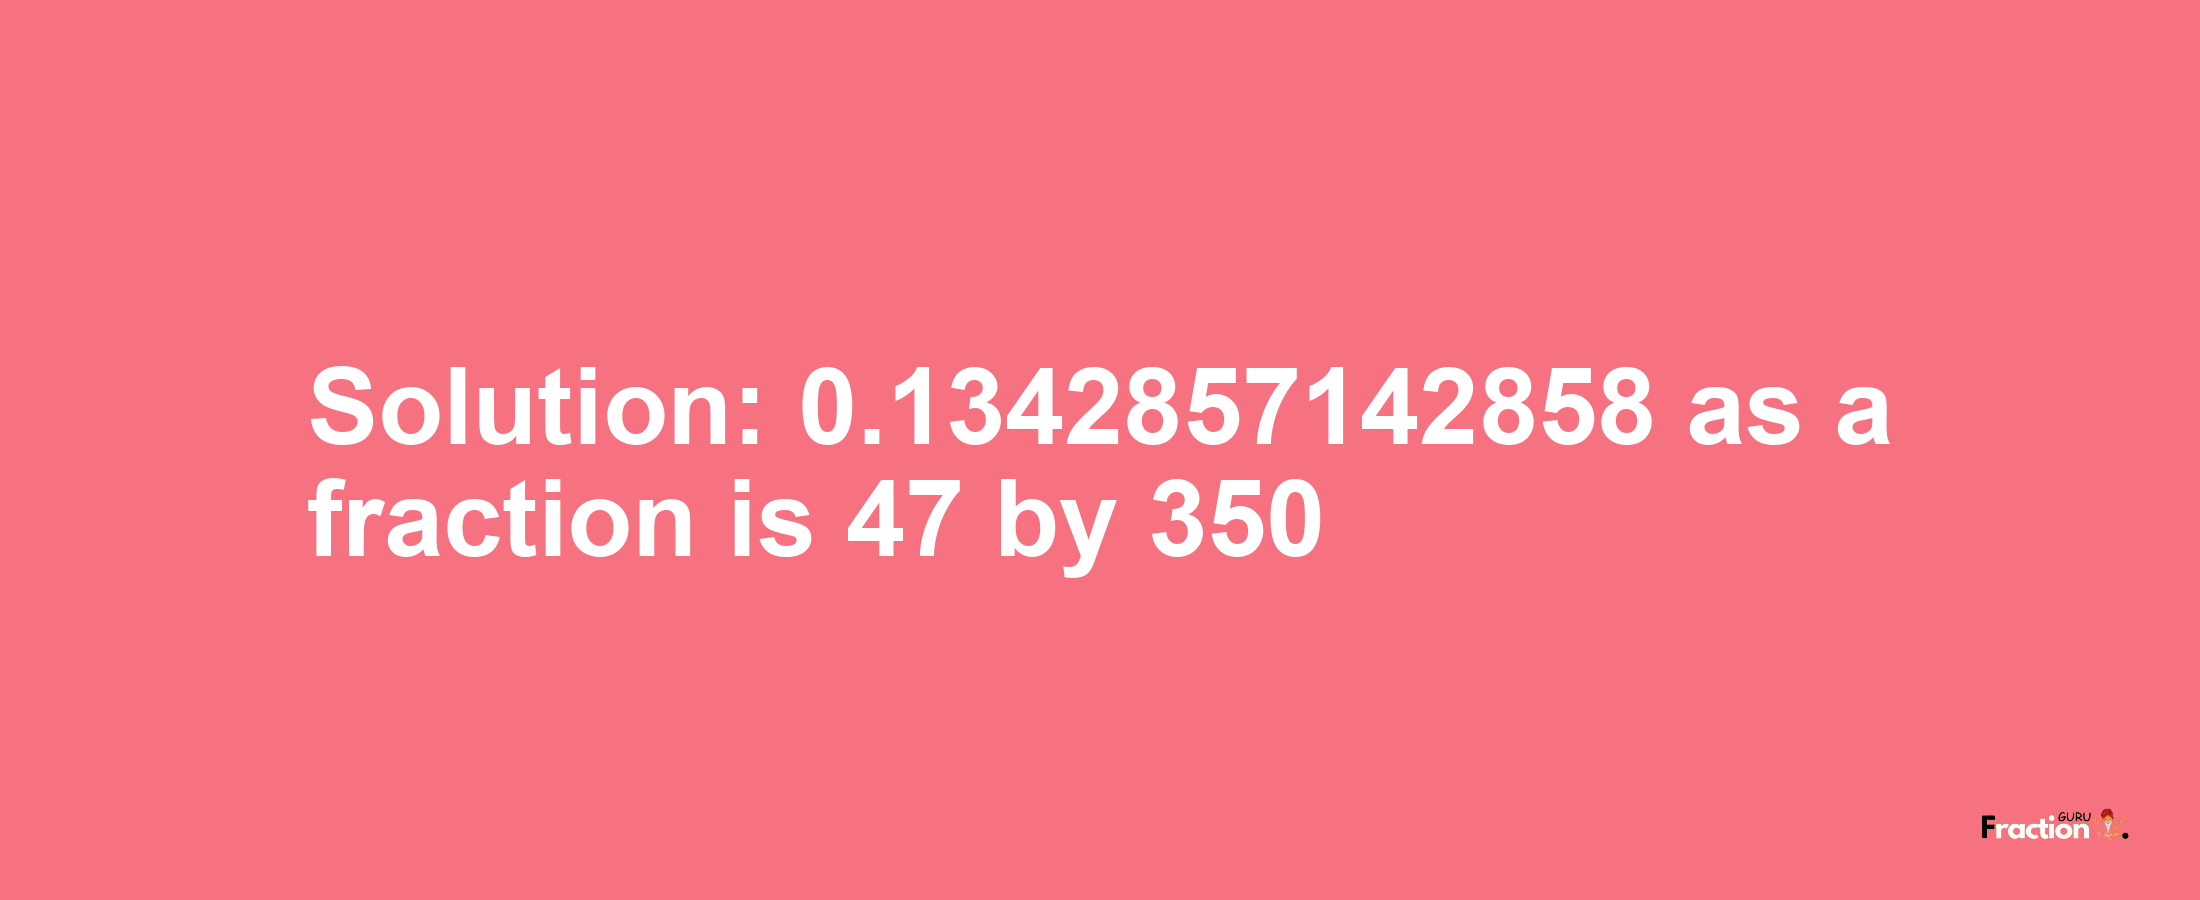 Solution:0.1342857142858 as a fraction is 47/350